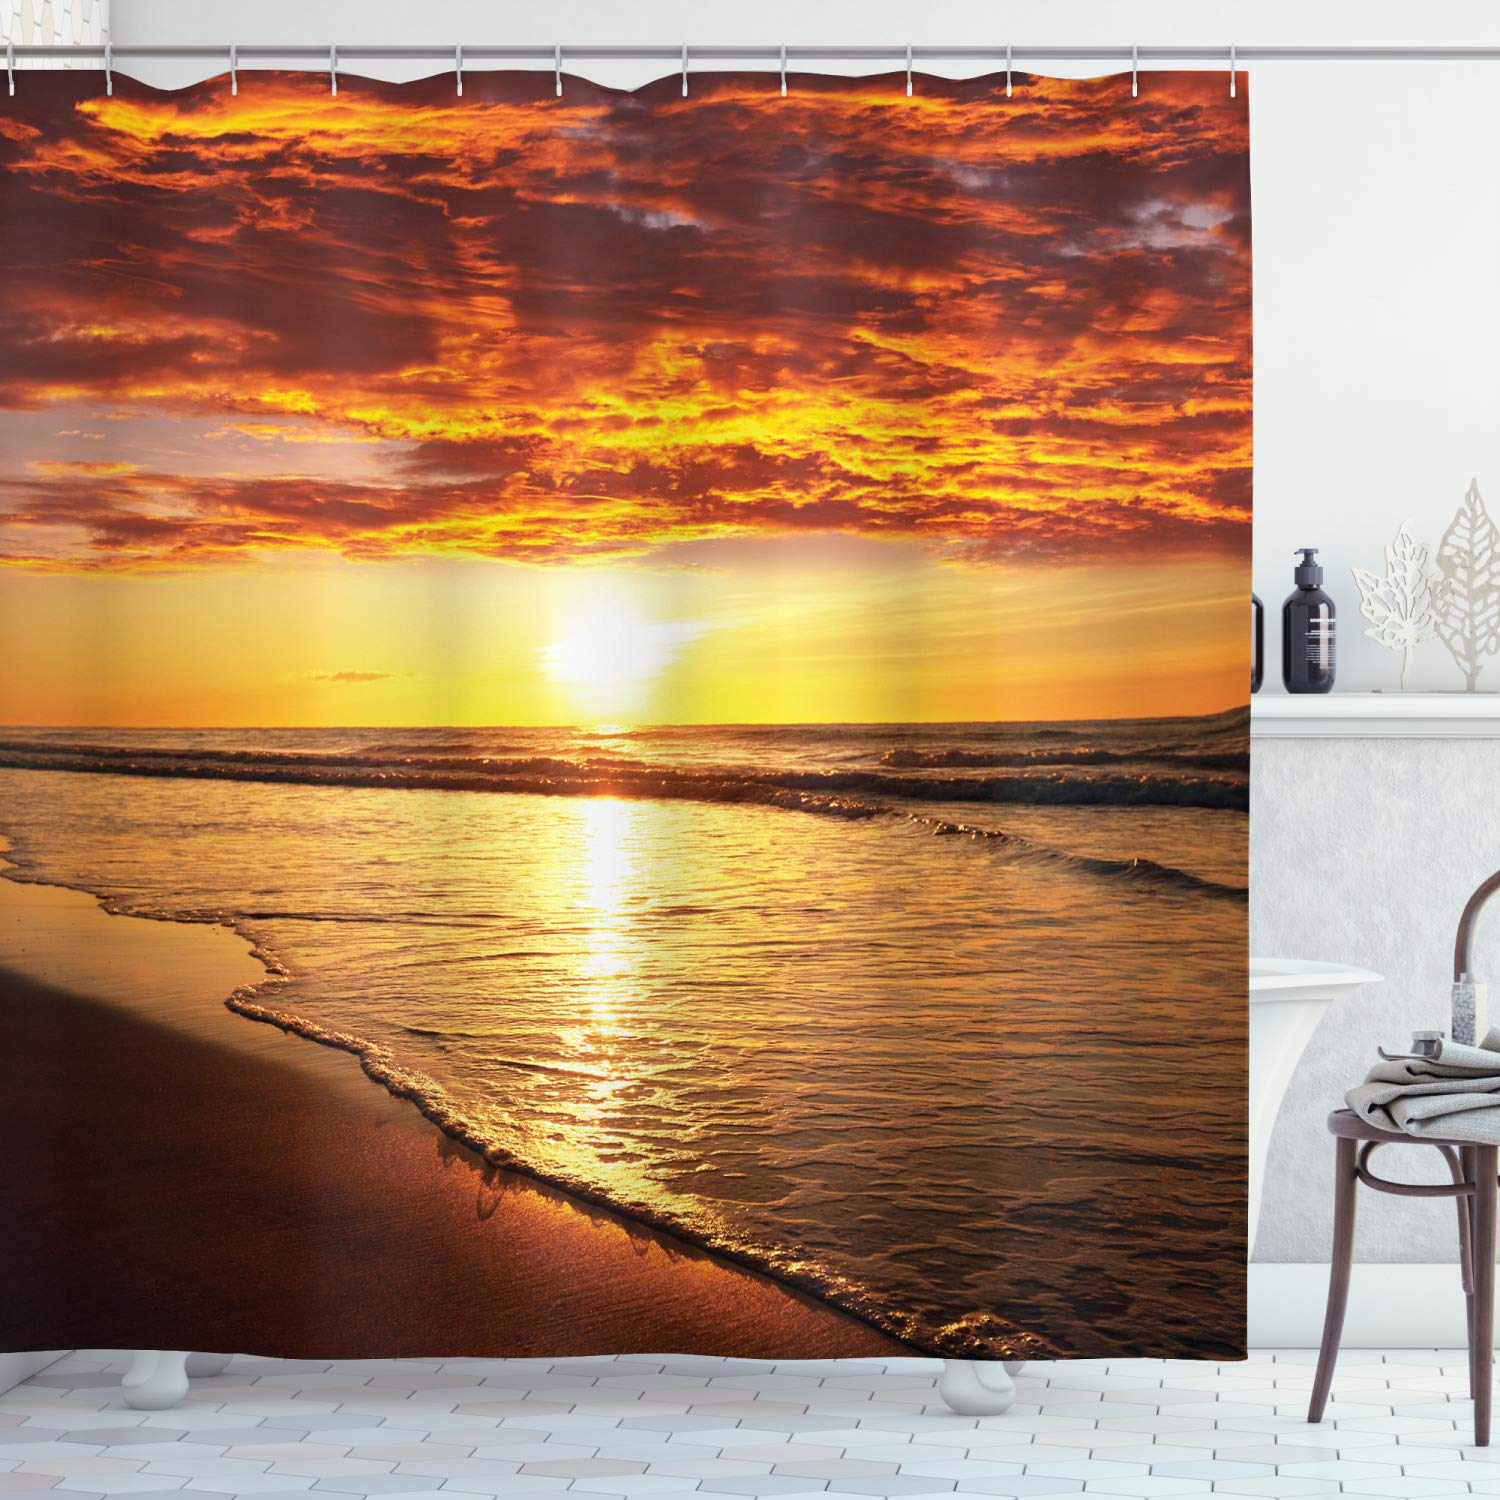 Ambesonne Hawaiian Decor Collection, Scenery Picture Print of Beach and Sunset Ocean Waves Print, Polyester Fabric Bathroom Shower Curtain Set with Hooks, Gold Orange Dark Ecru